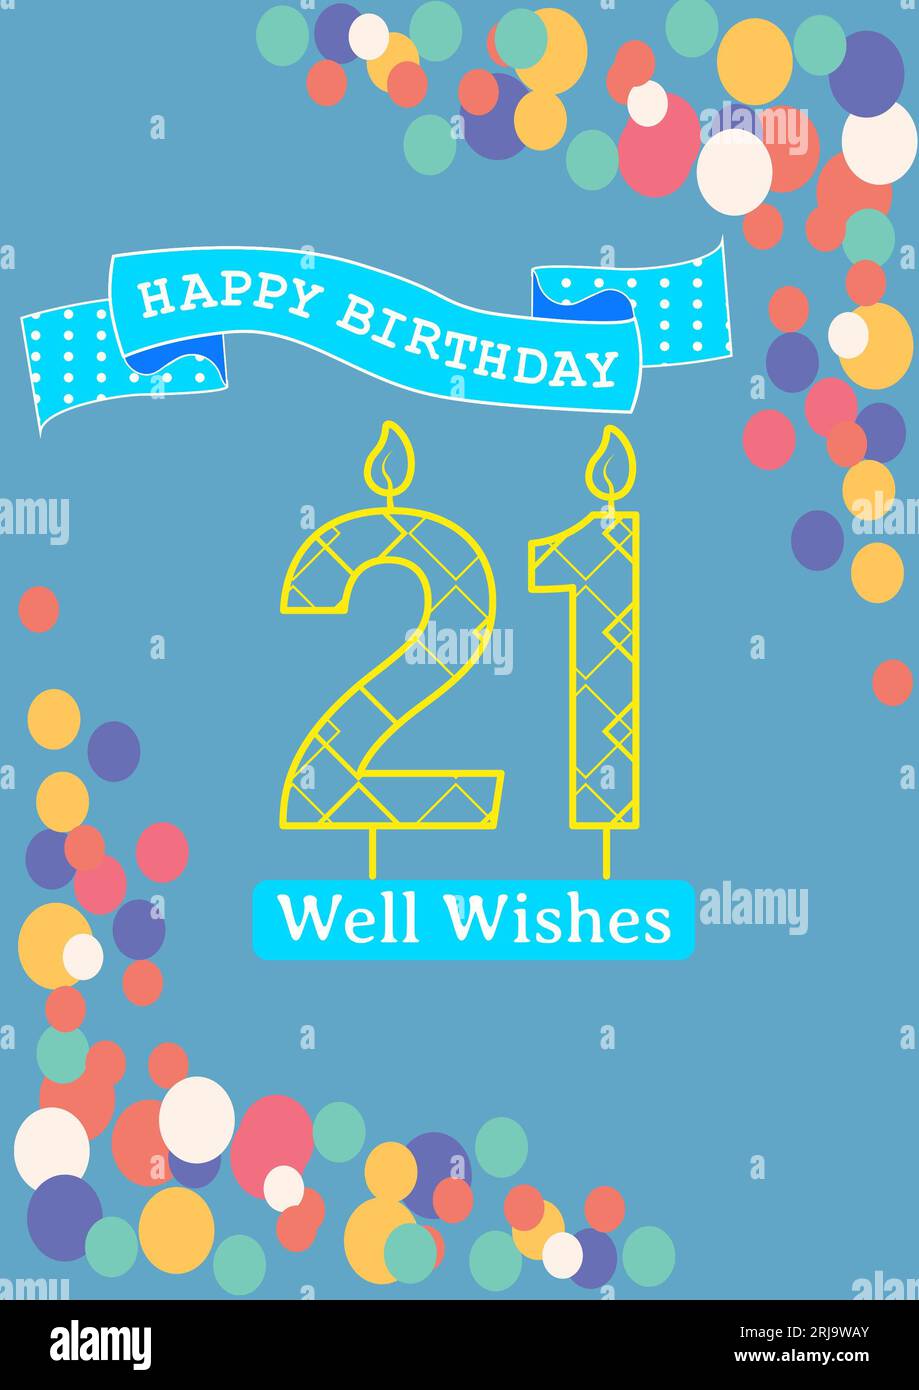 Composition of happy 21st birthday text over spots pattern on blue background Stock Photo